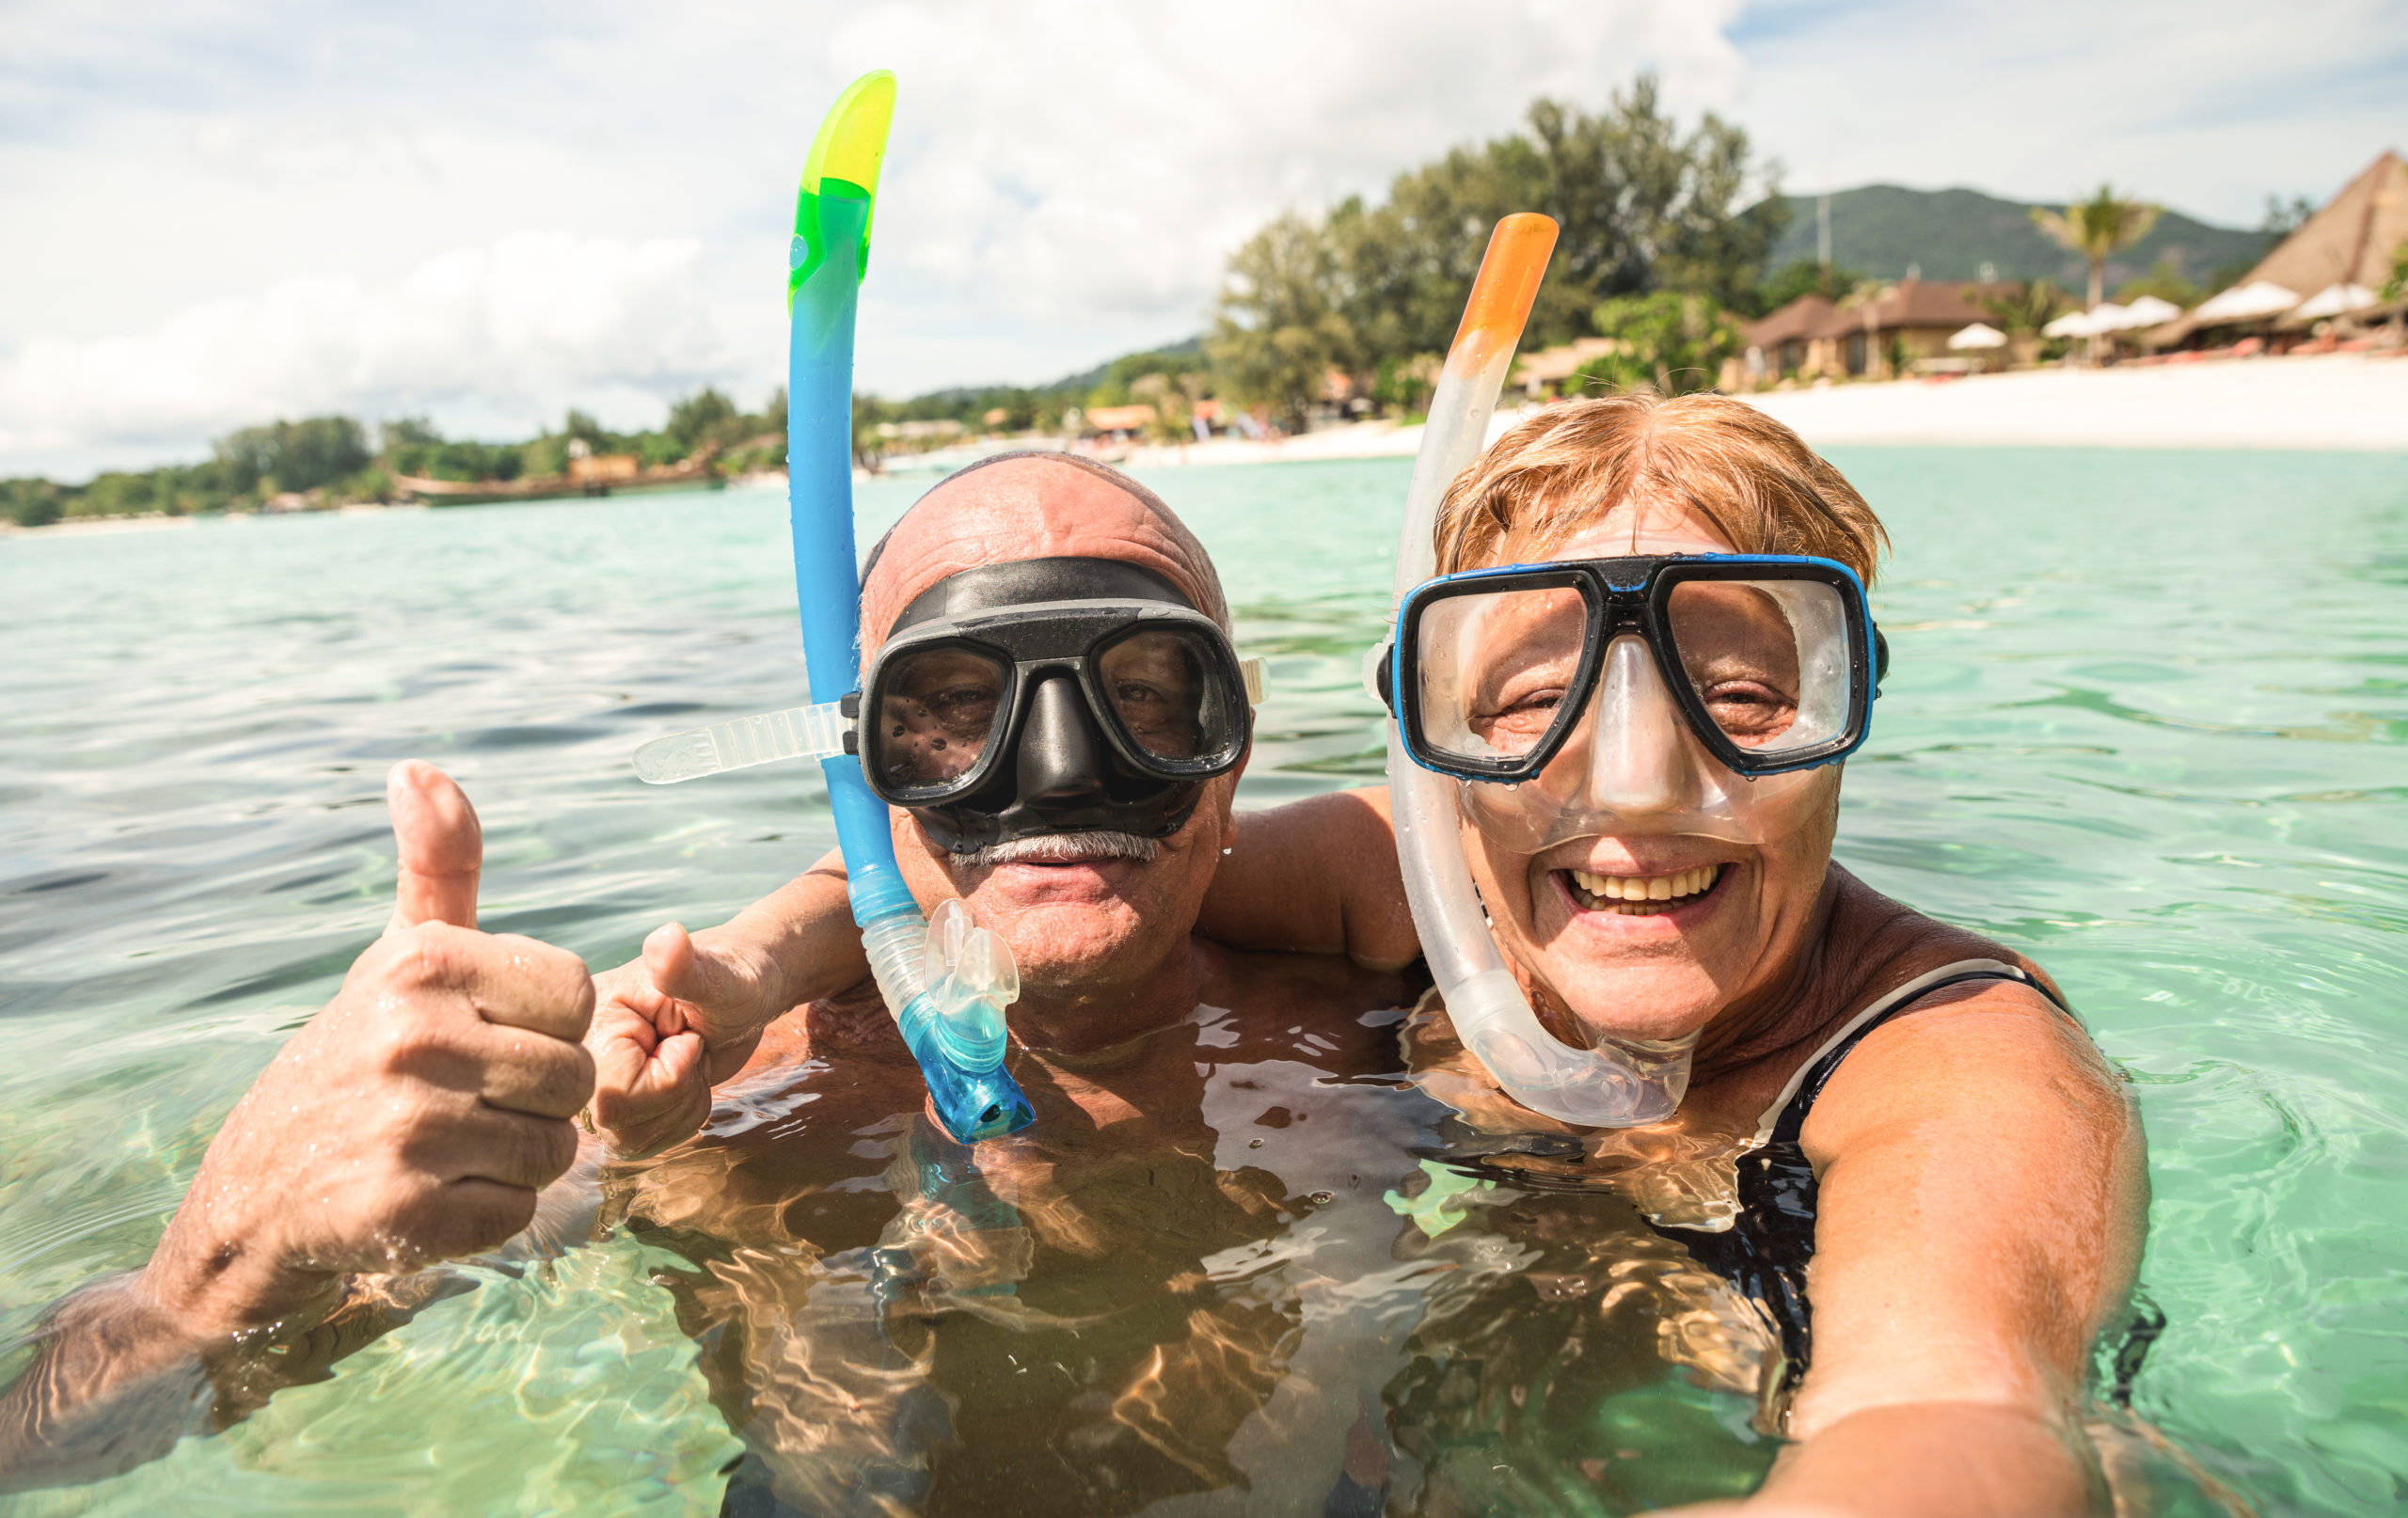 Summertime Adventures for Seniors: Planning the Perfect Daytrip